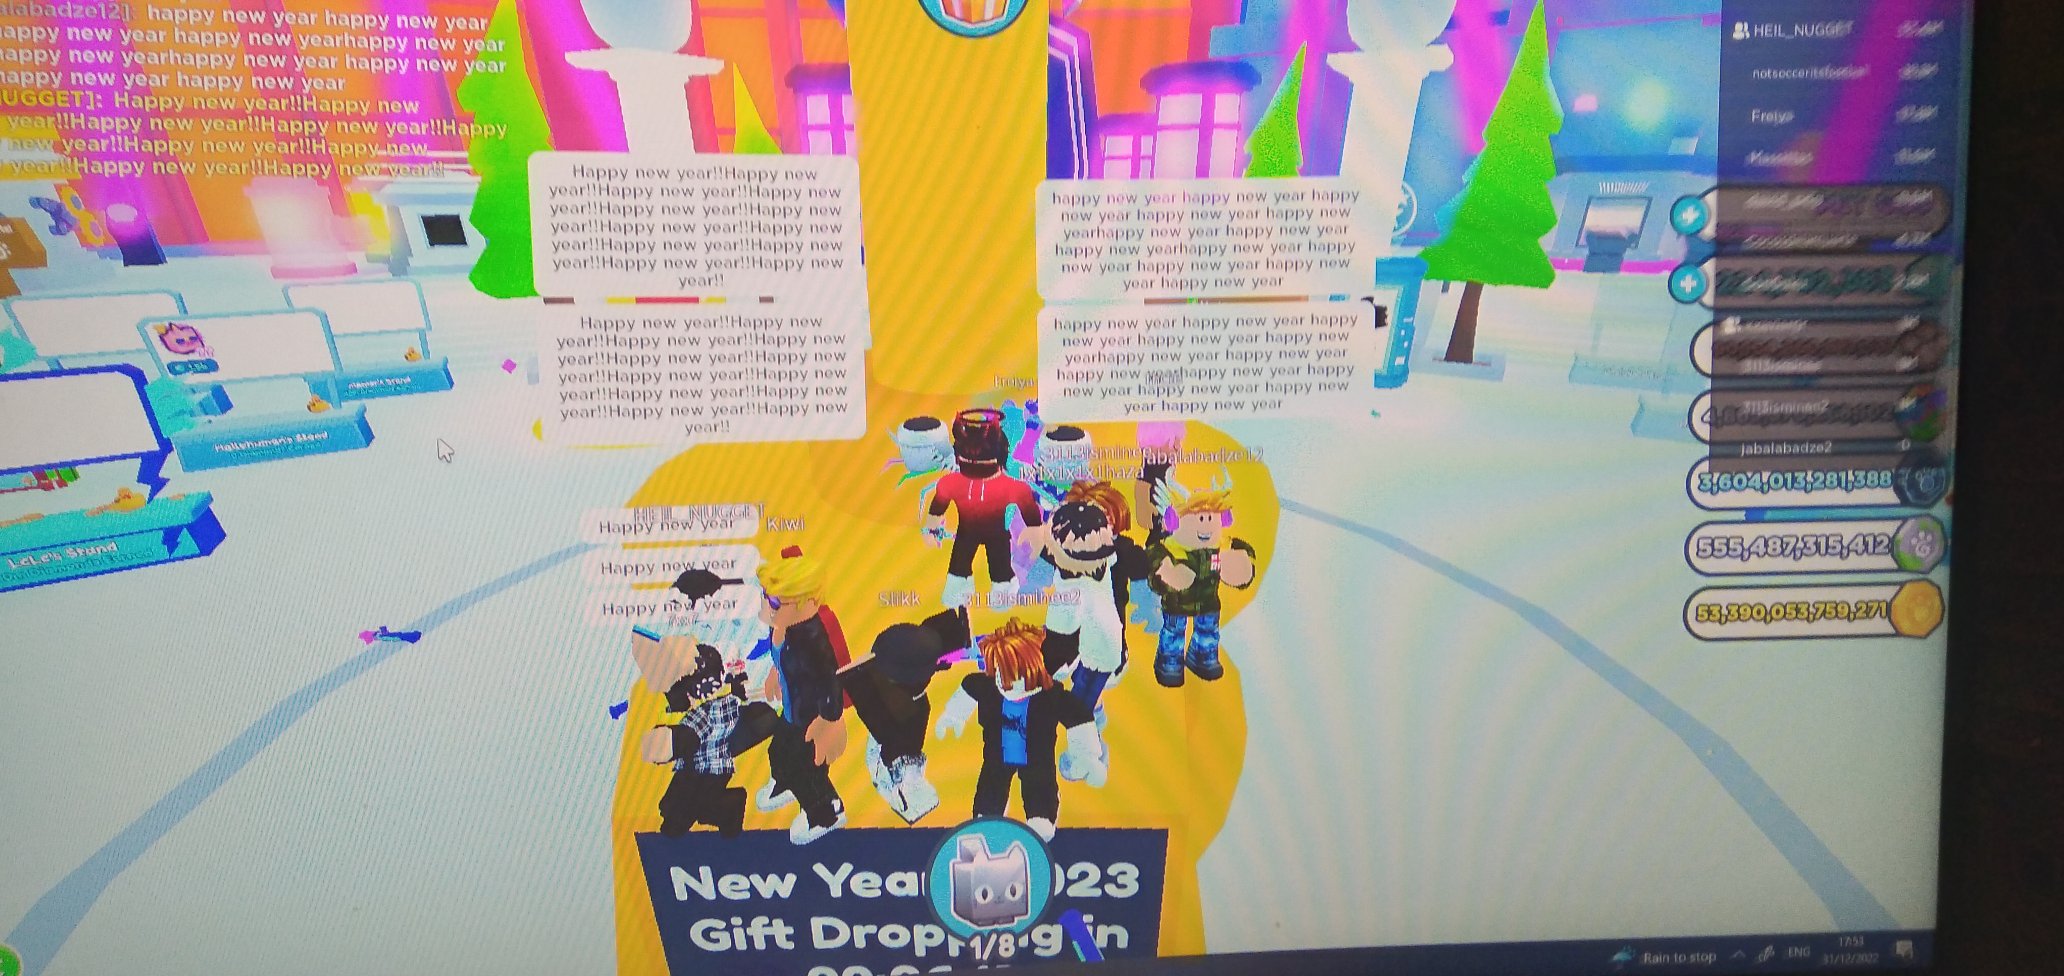 Plebcy on X: [NEW] 1,500 Robux Roblox Card, FOLLOW, LIKE AND